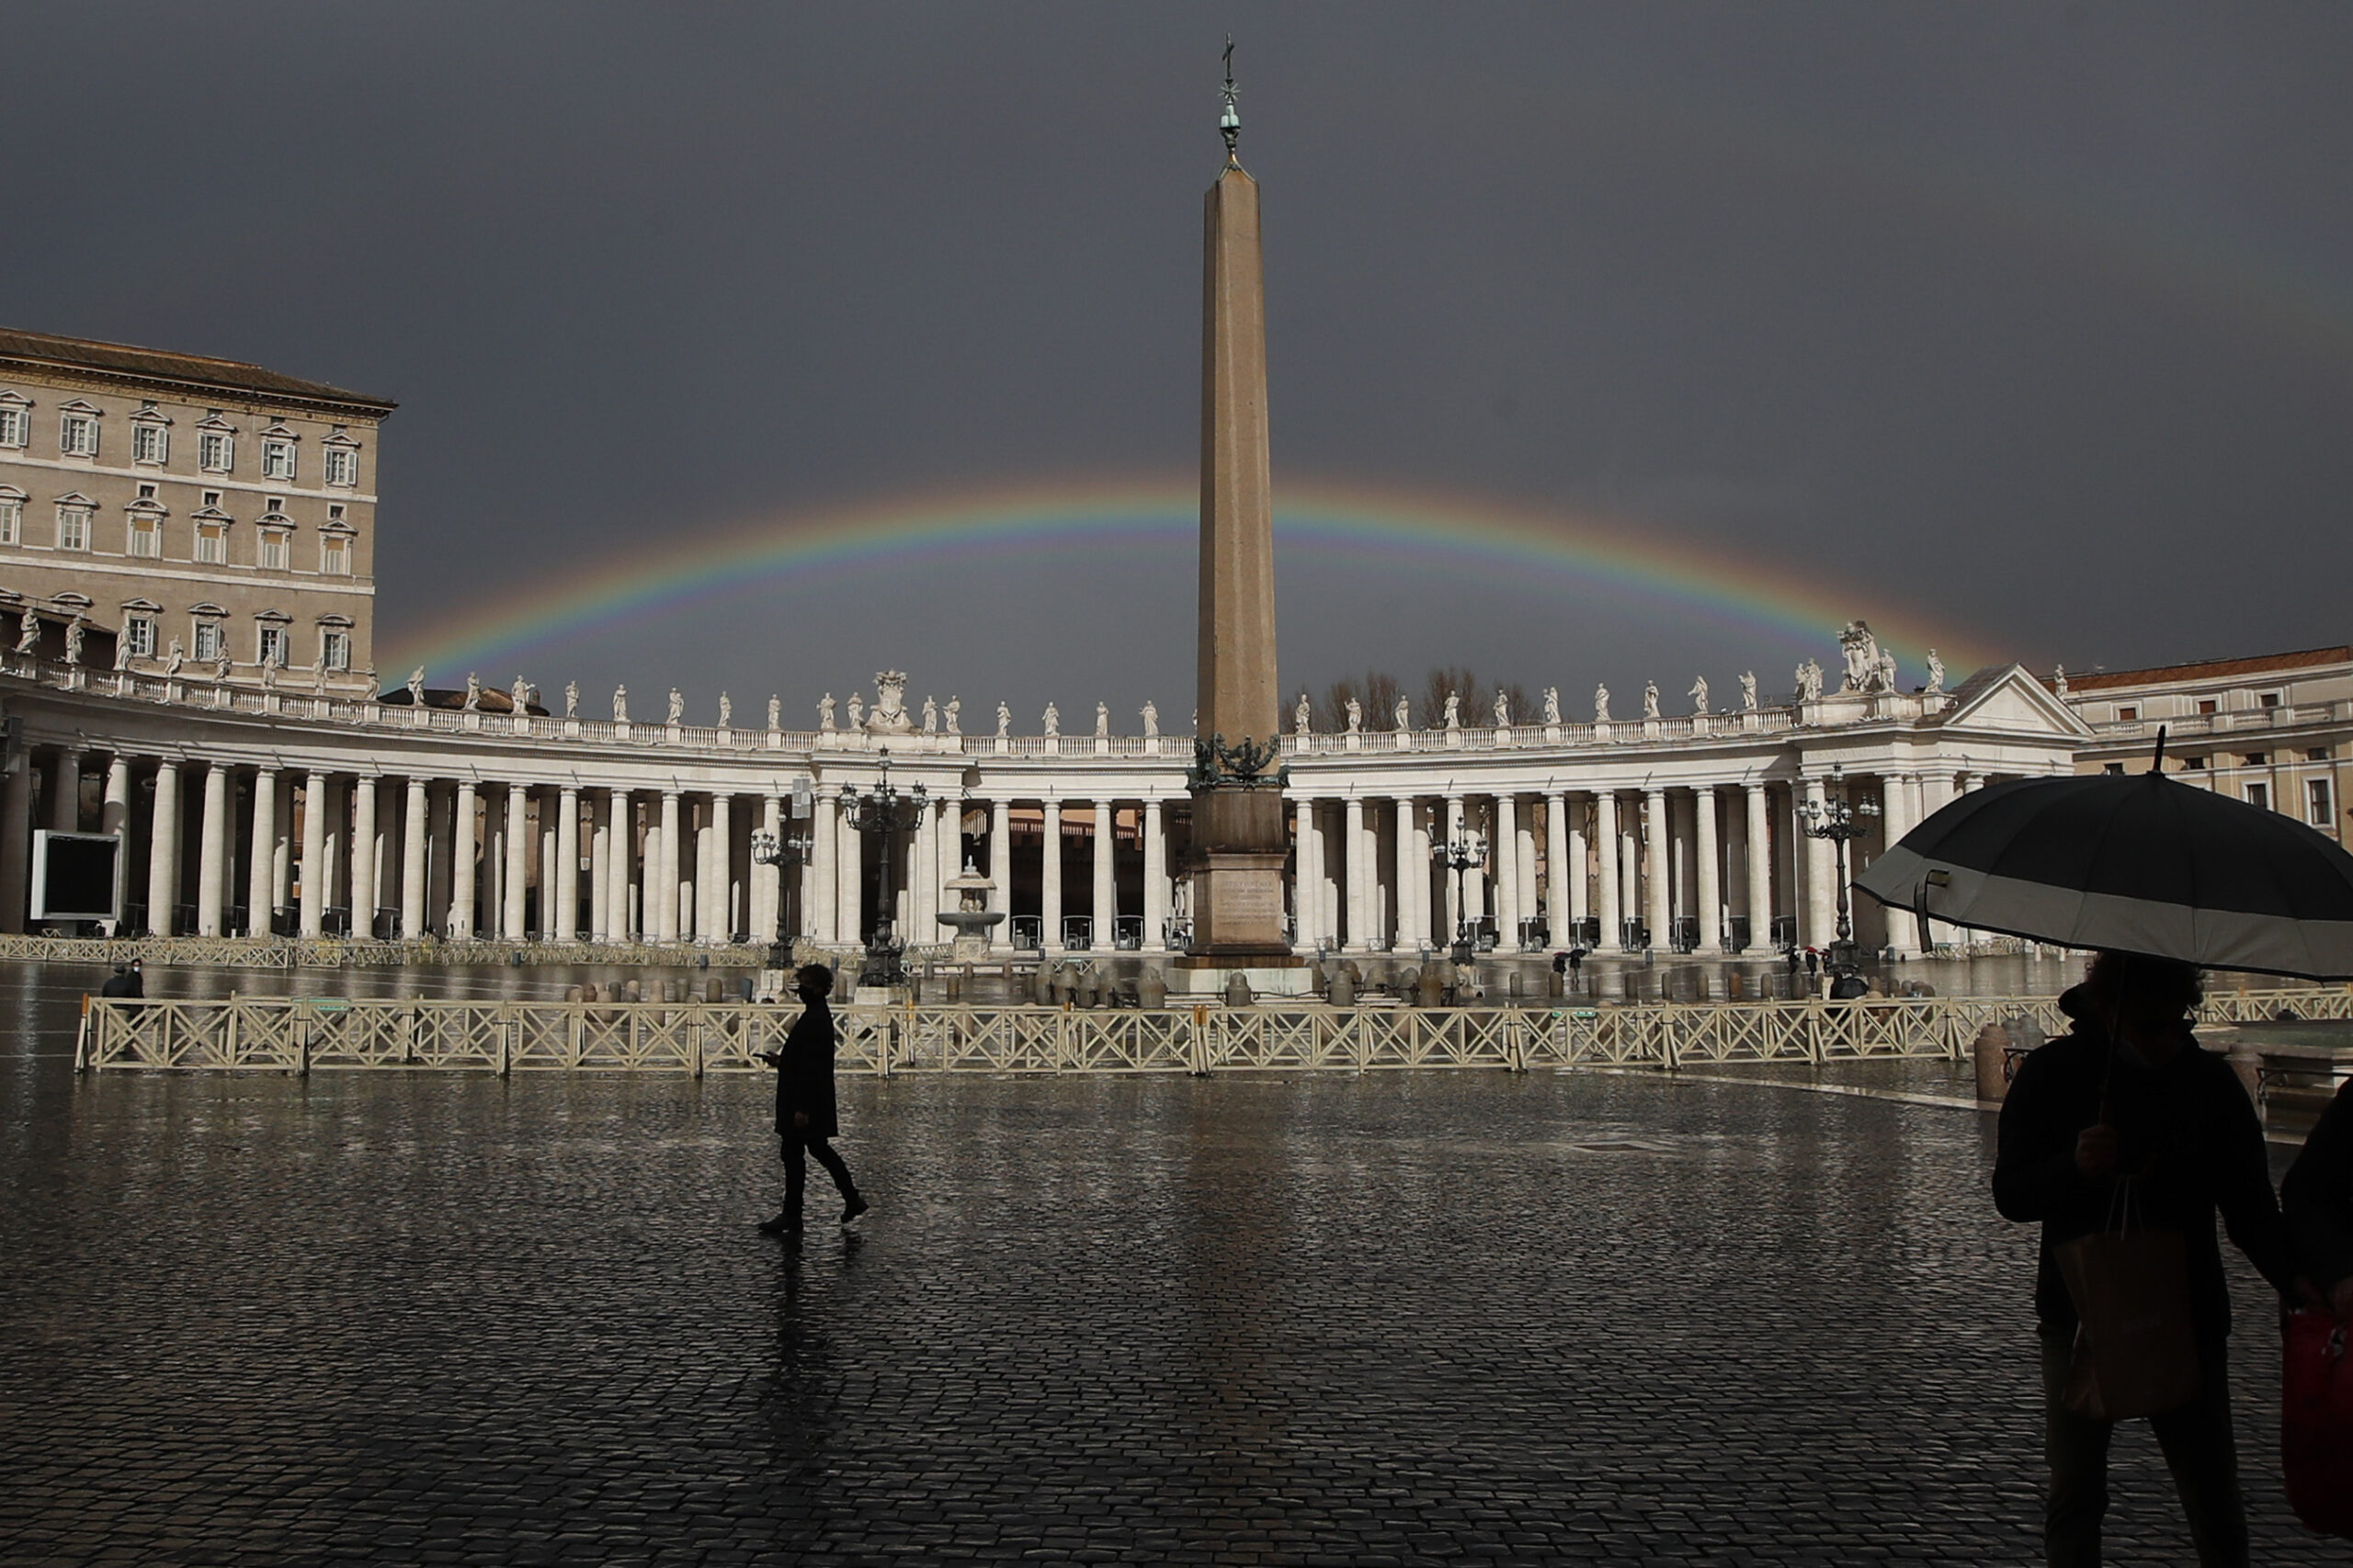 A rainbow shines over St. Peter's Square at the Vatican, on Jan. 31, 2021. (AP Photo/Alessandra Tarantino, File)